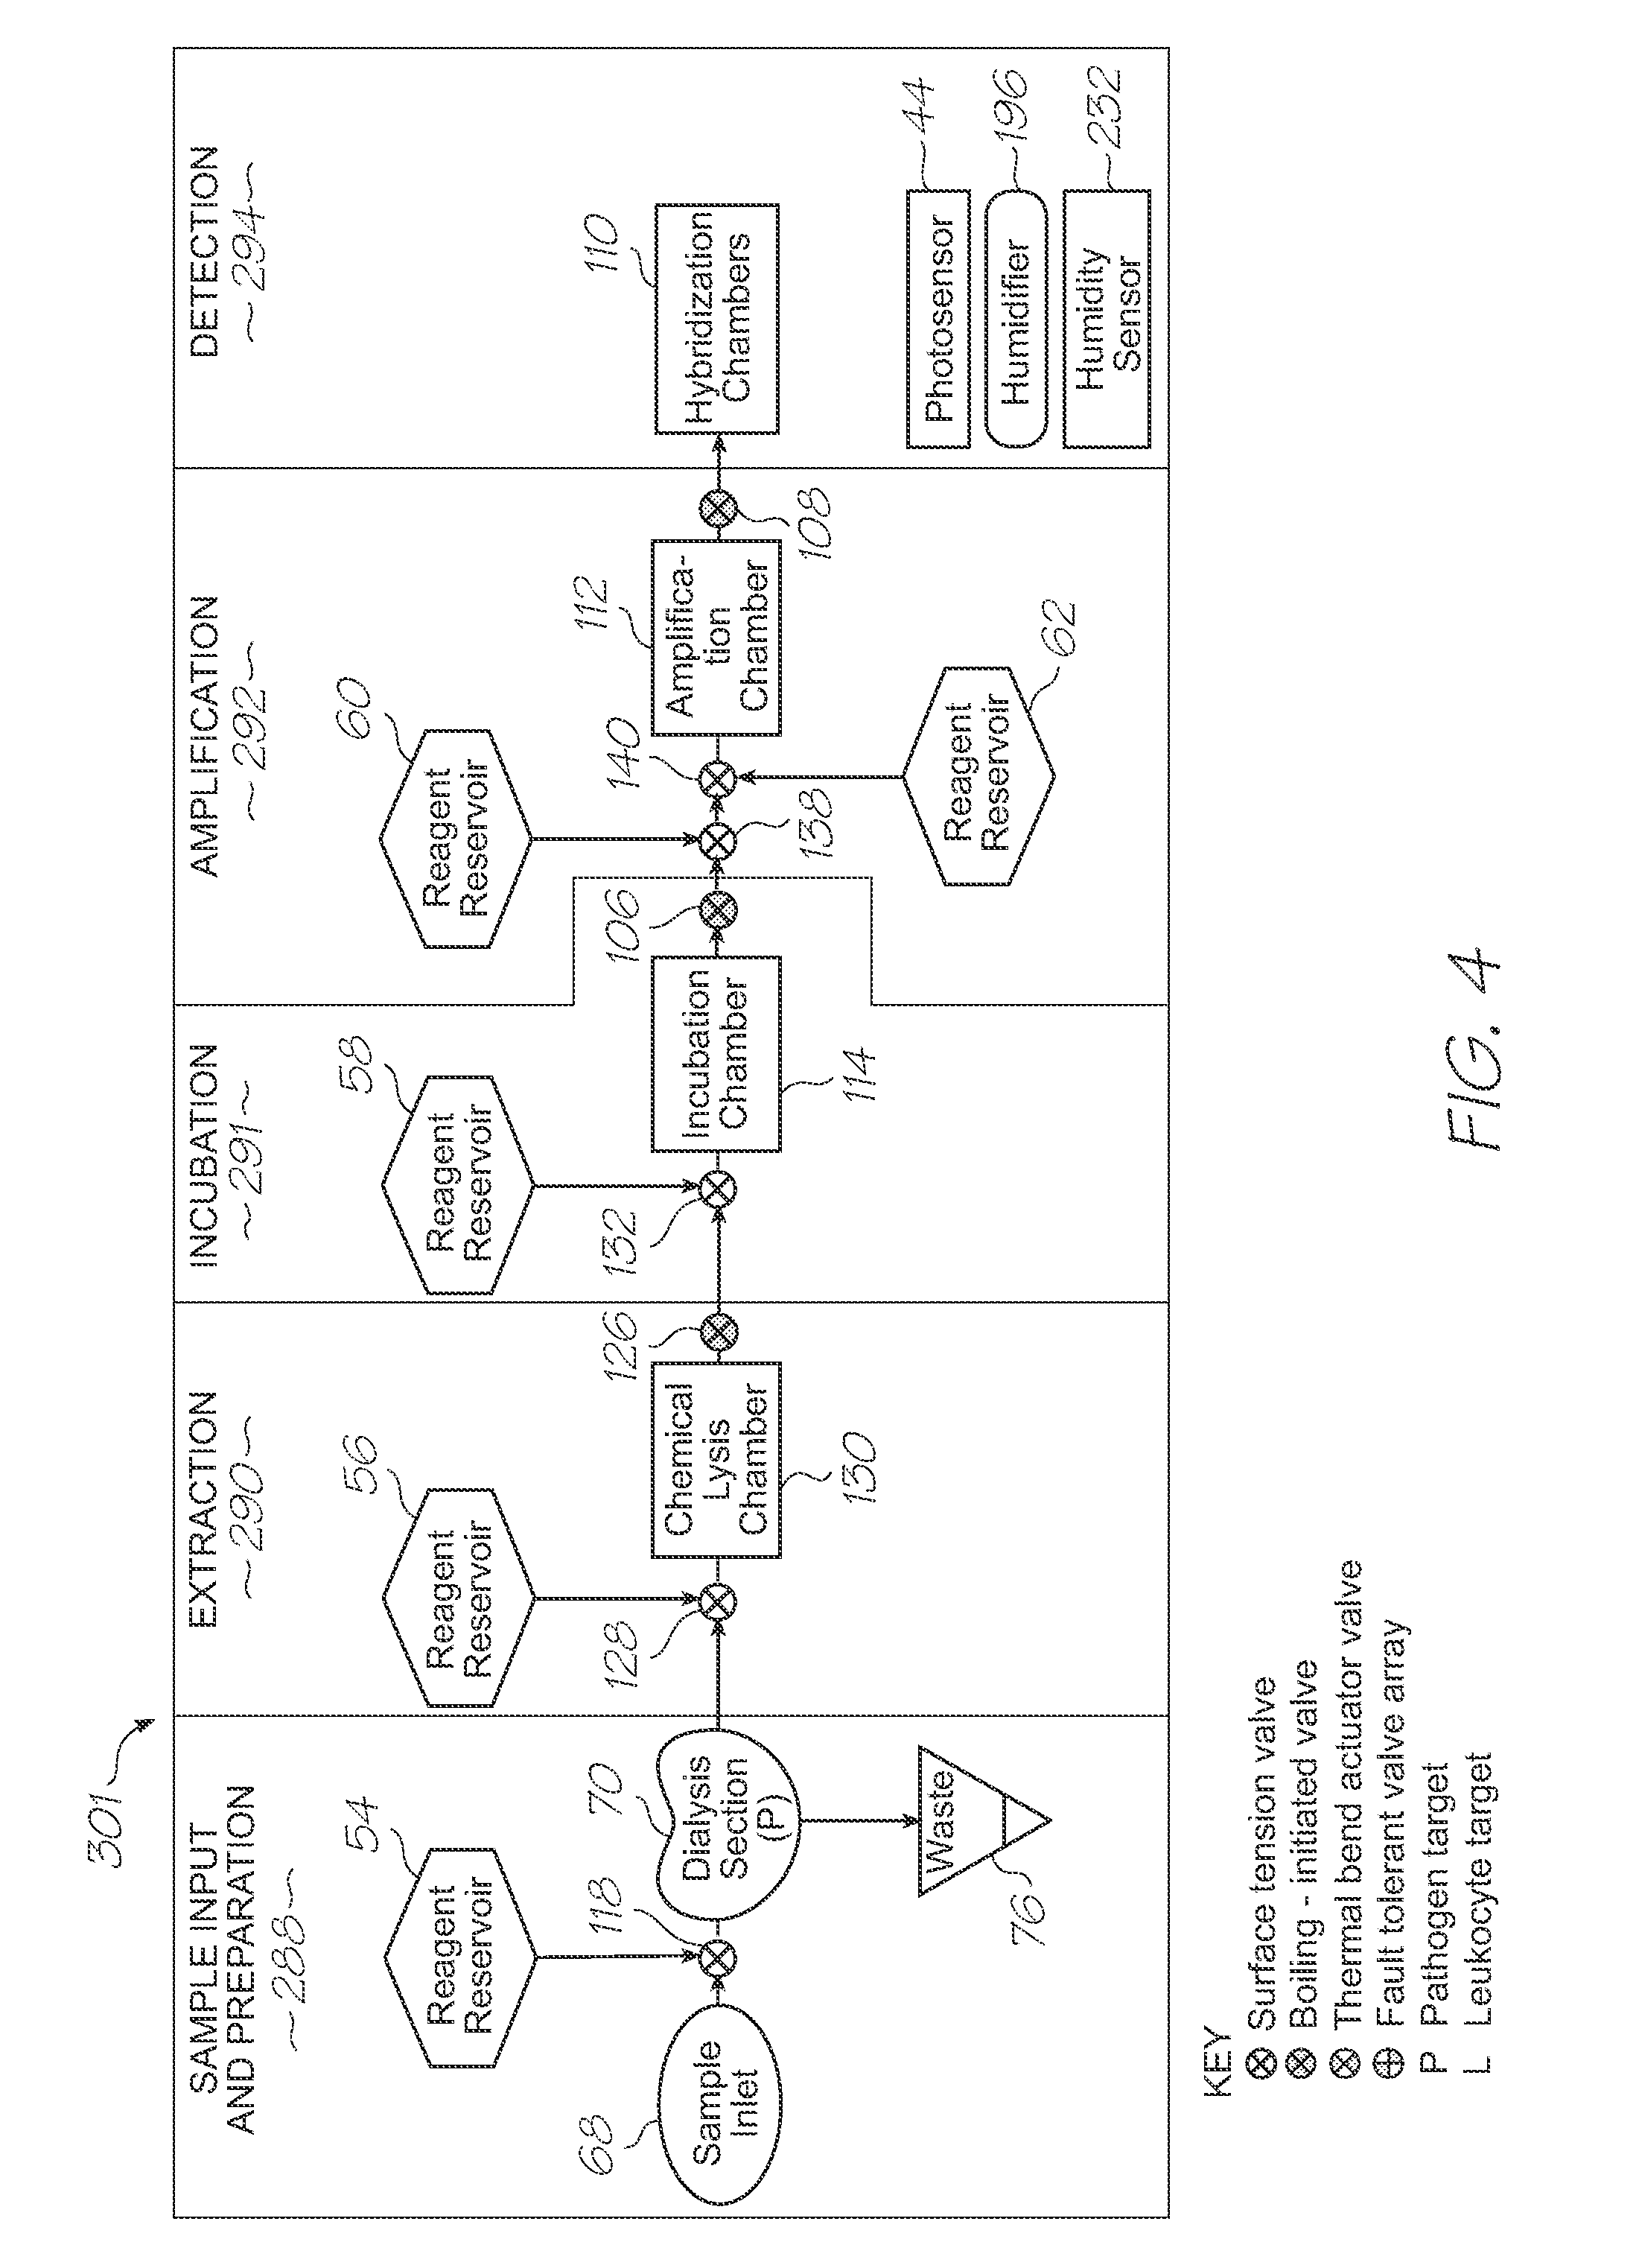 Microfluidic device with small cross sectional area microchannel